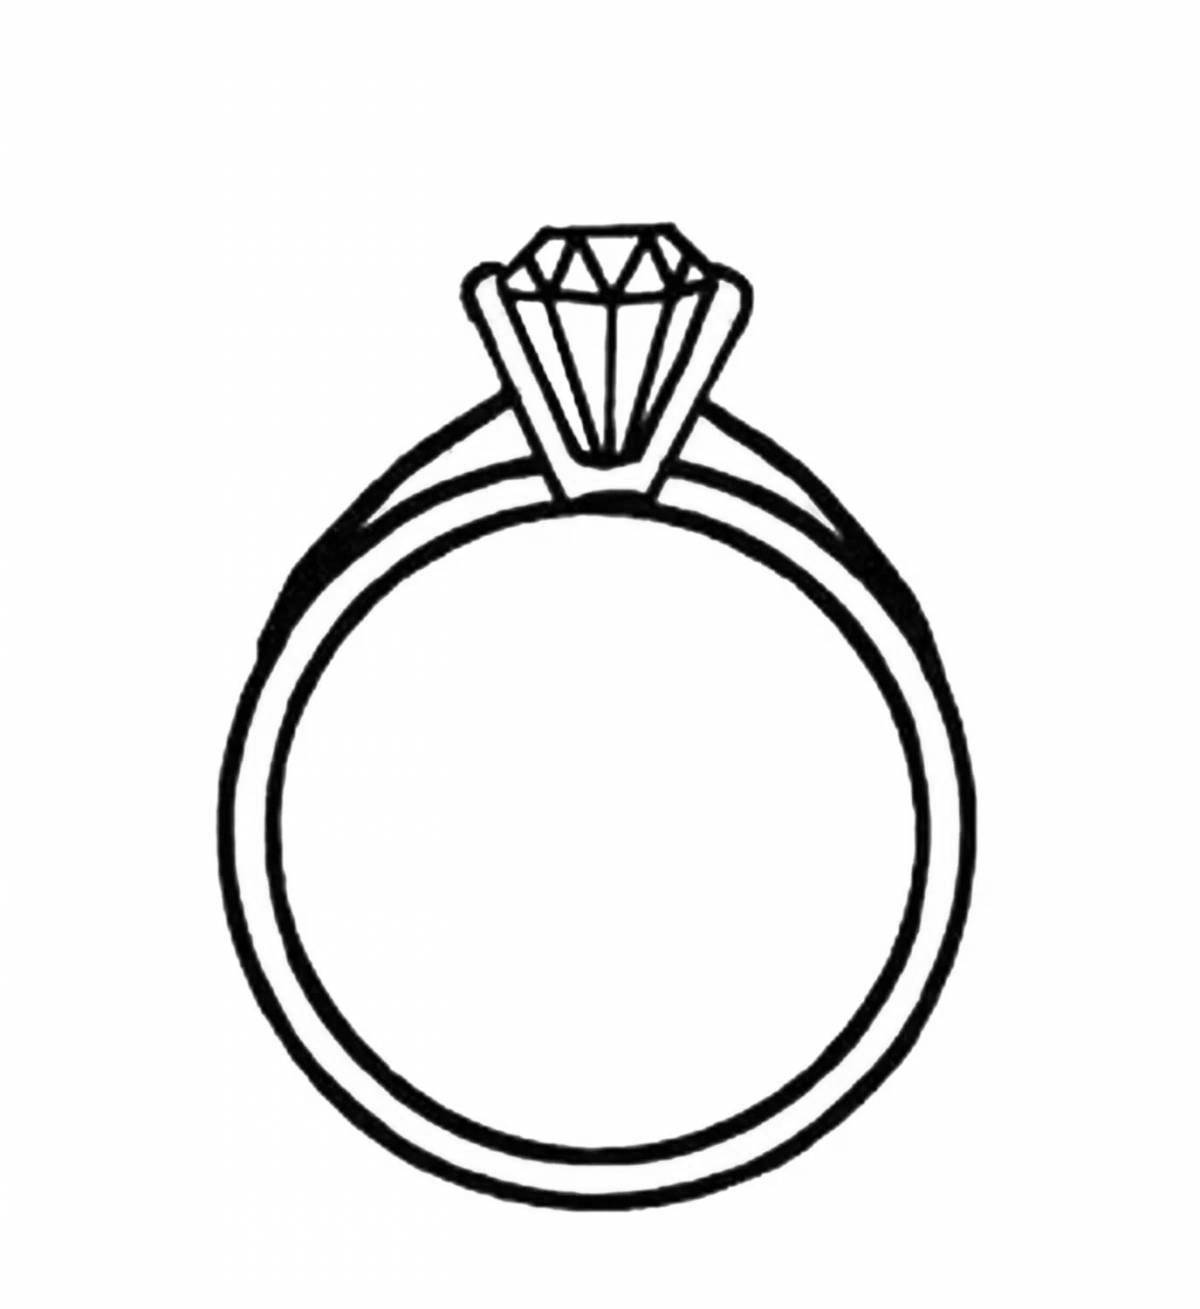 Coloring page fancy rings for girls